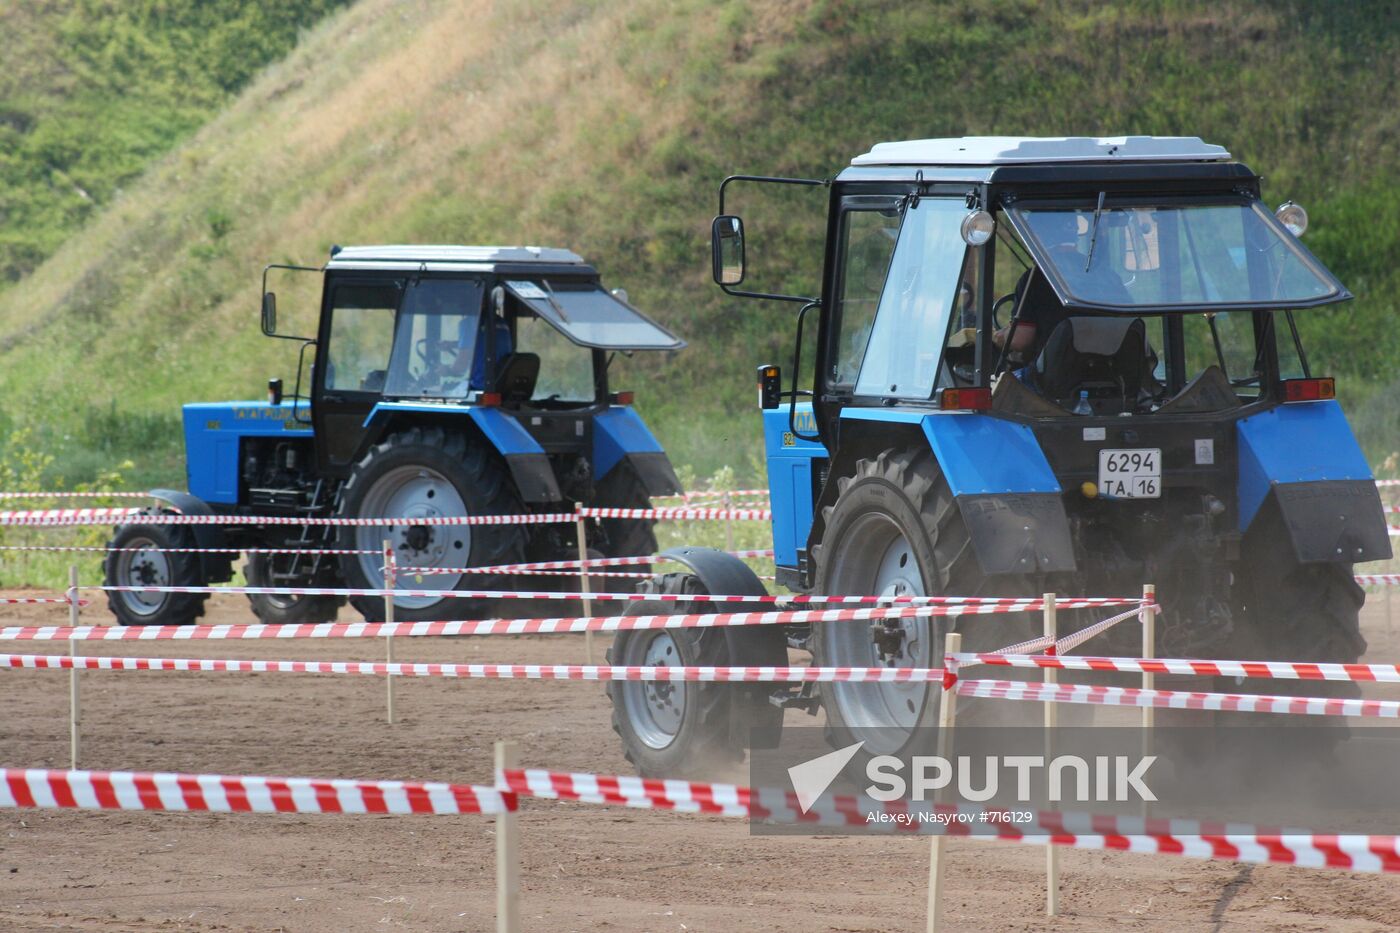 Tractor drivers compete on tractordrome